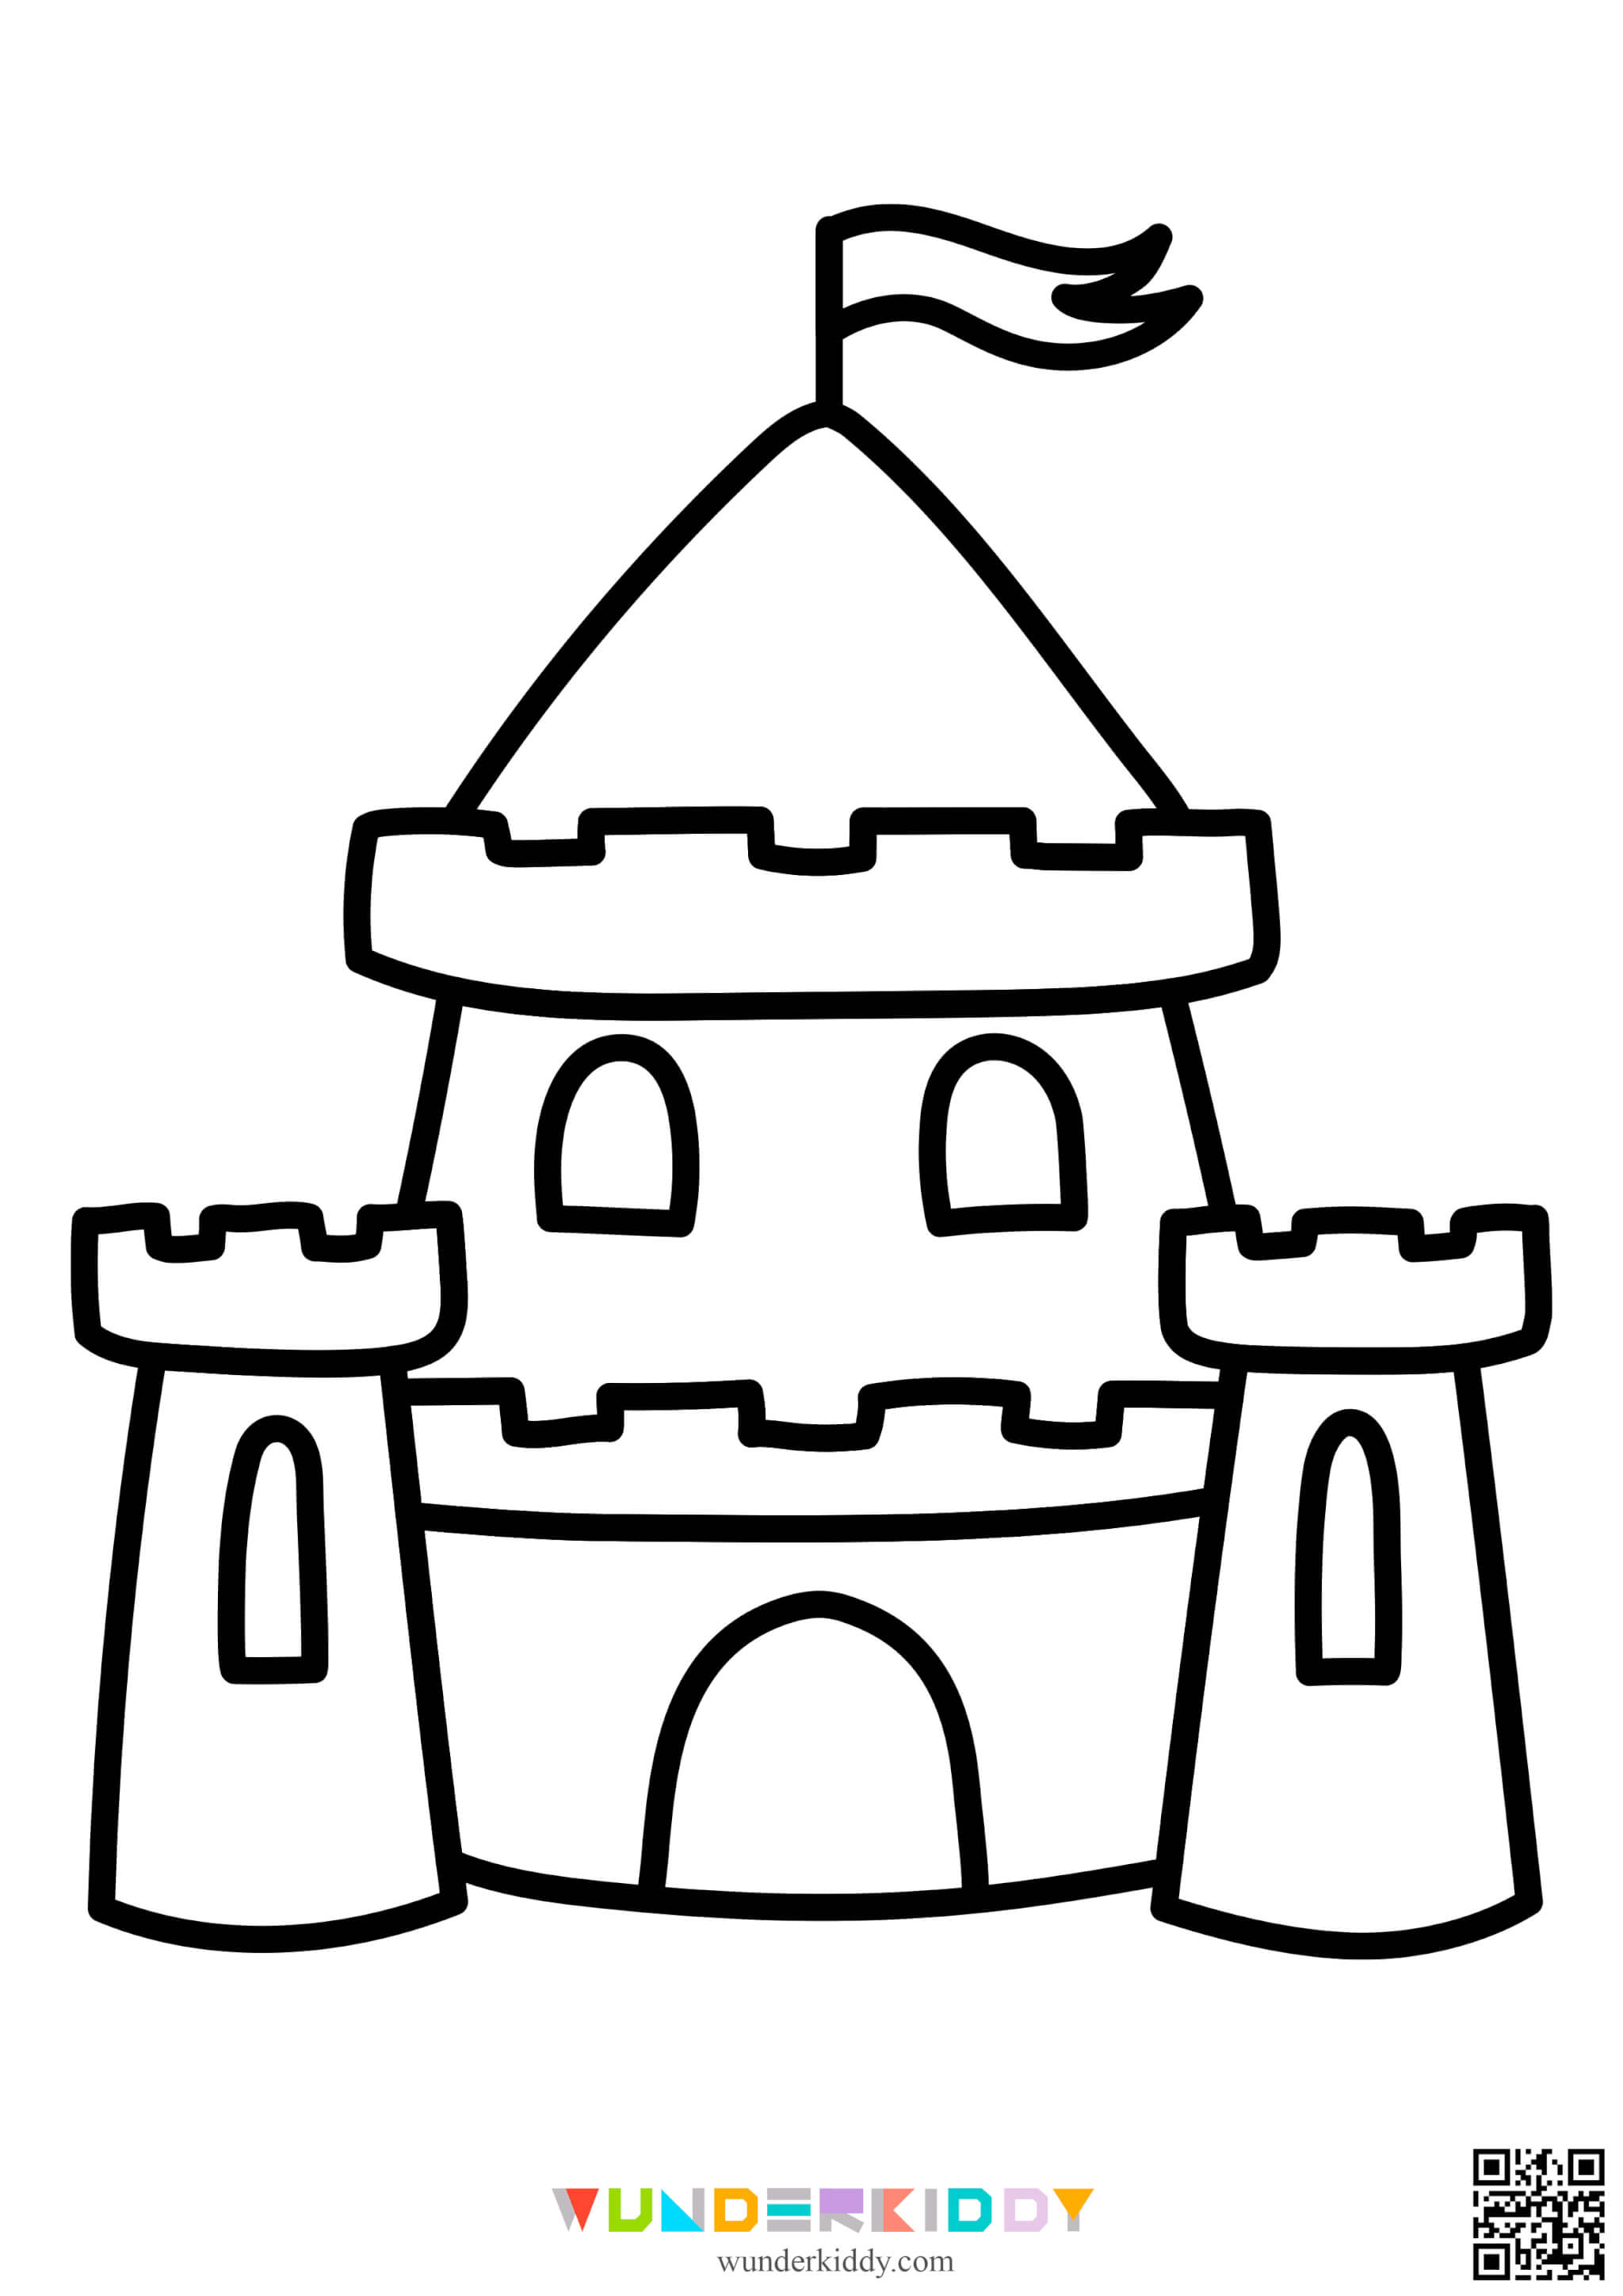 Summer Coloring Pages for Kids - Image 14